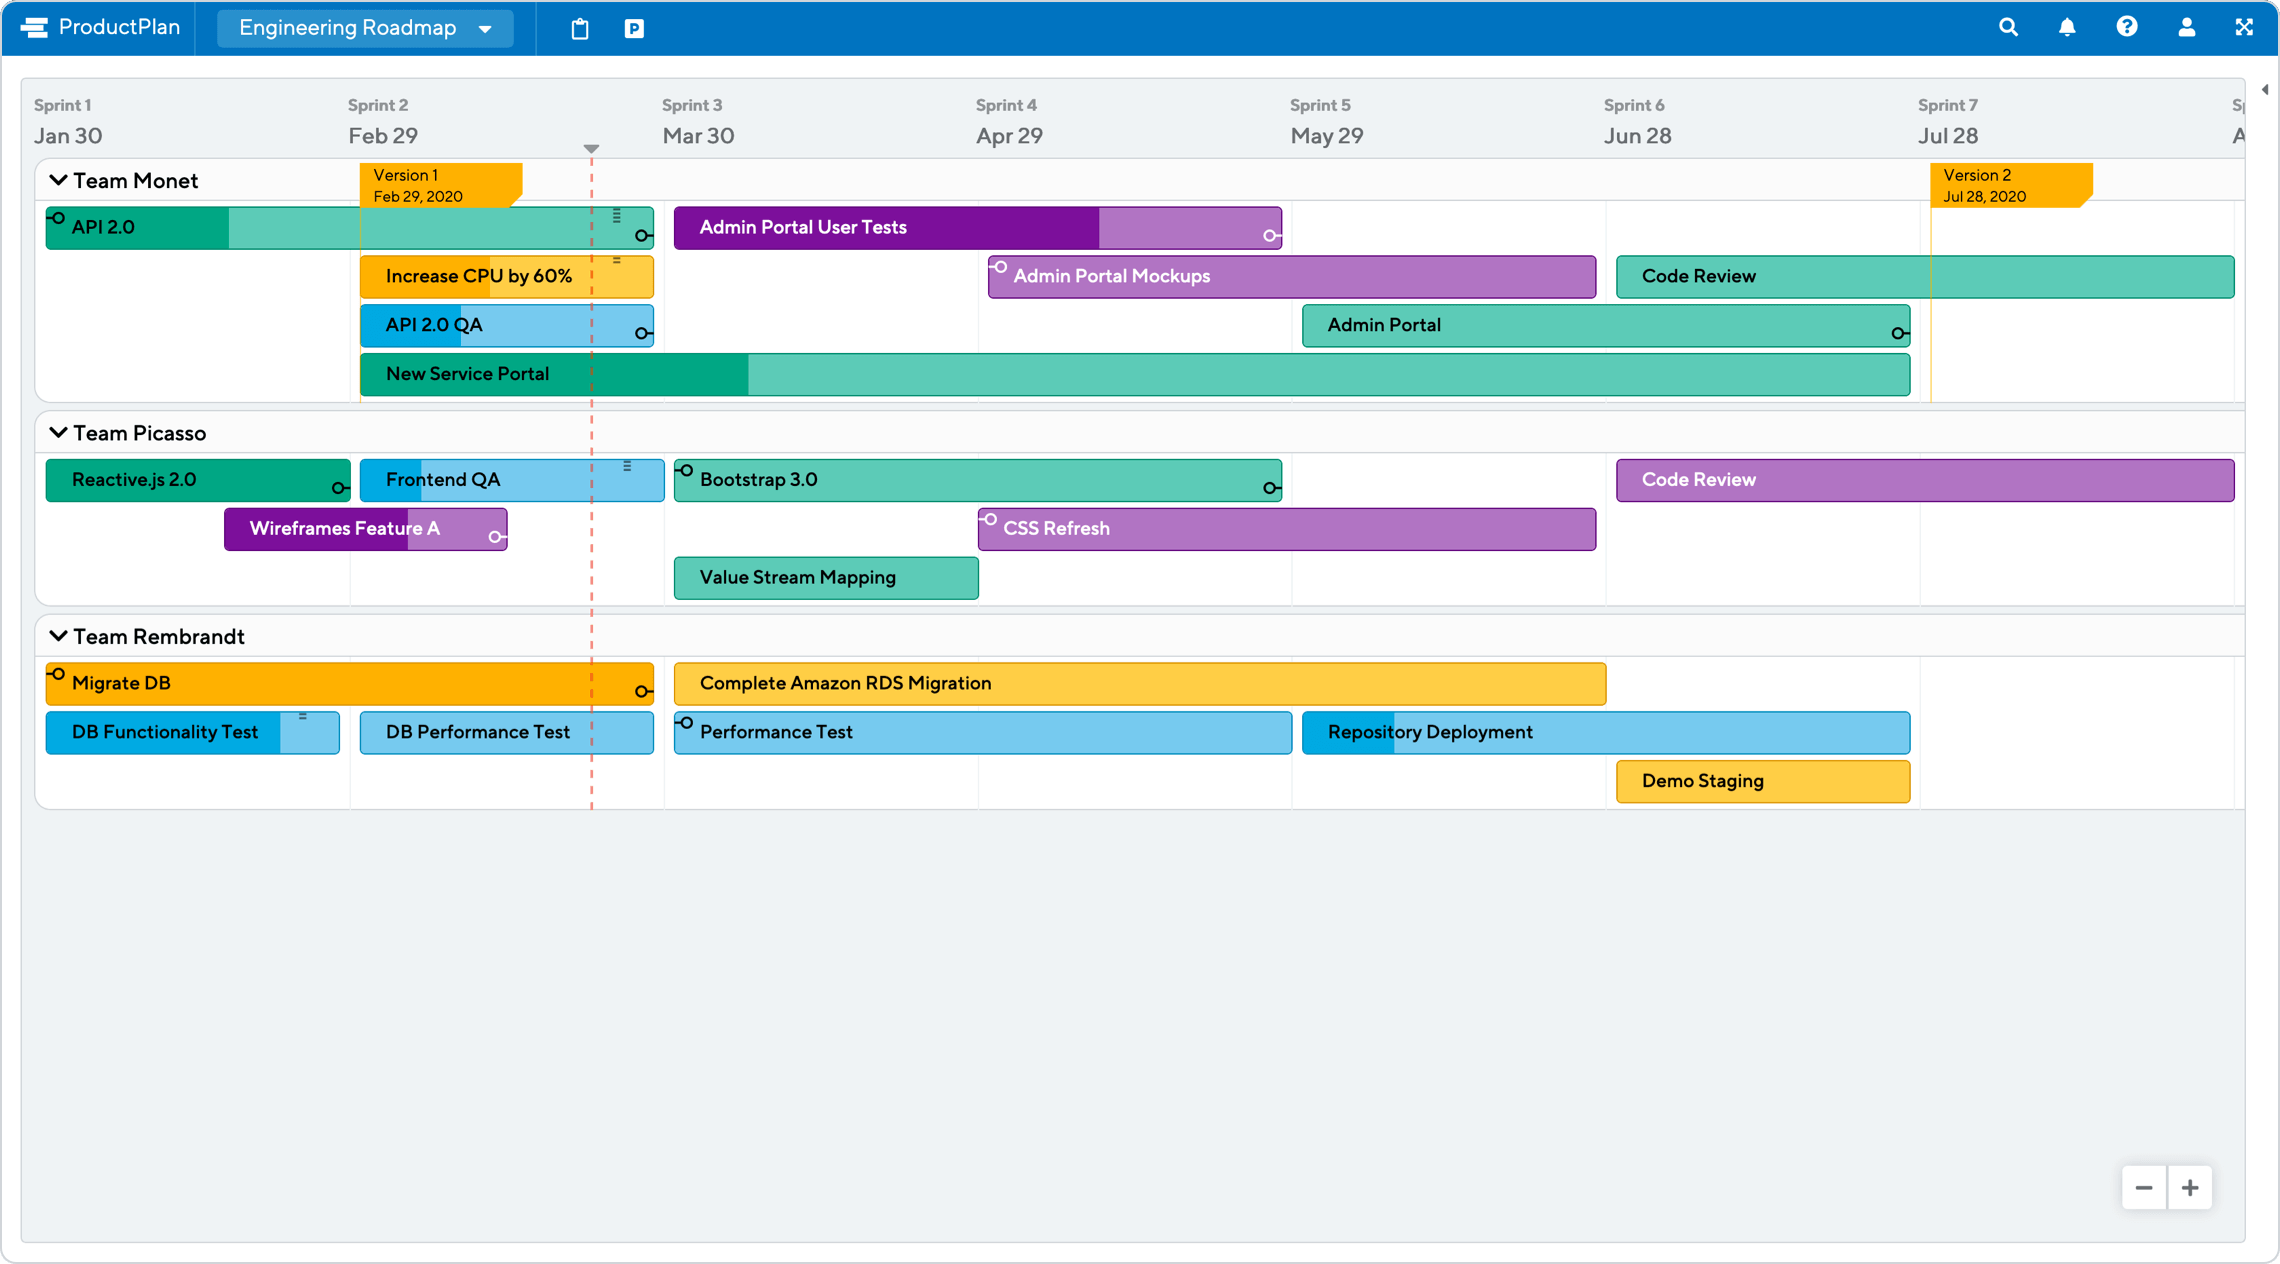 Engineering Roadmap Template by ProductPlan